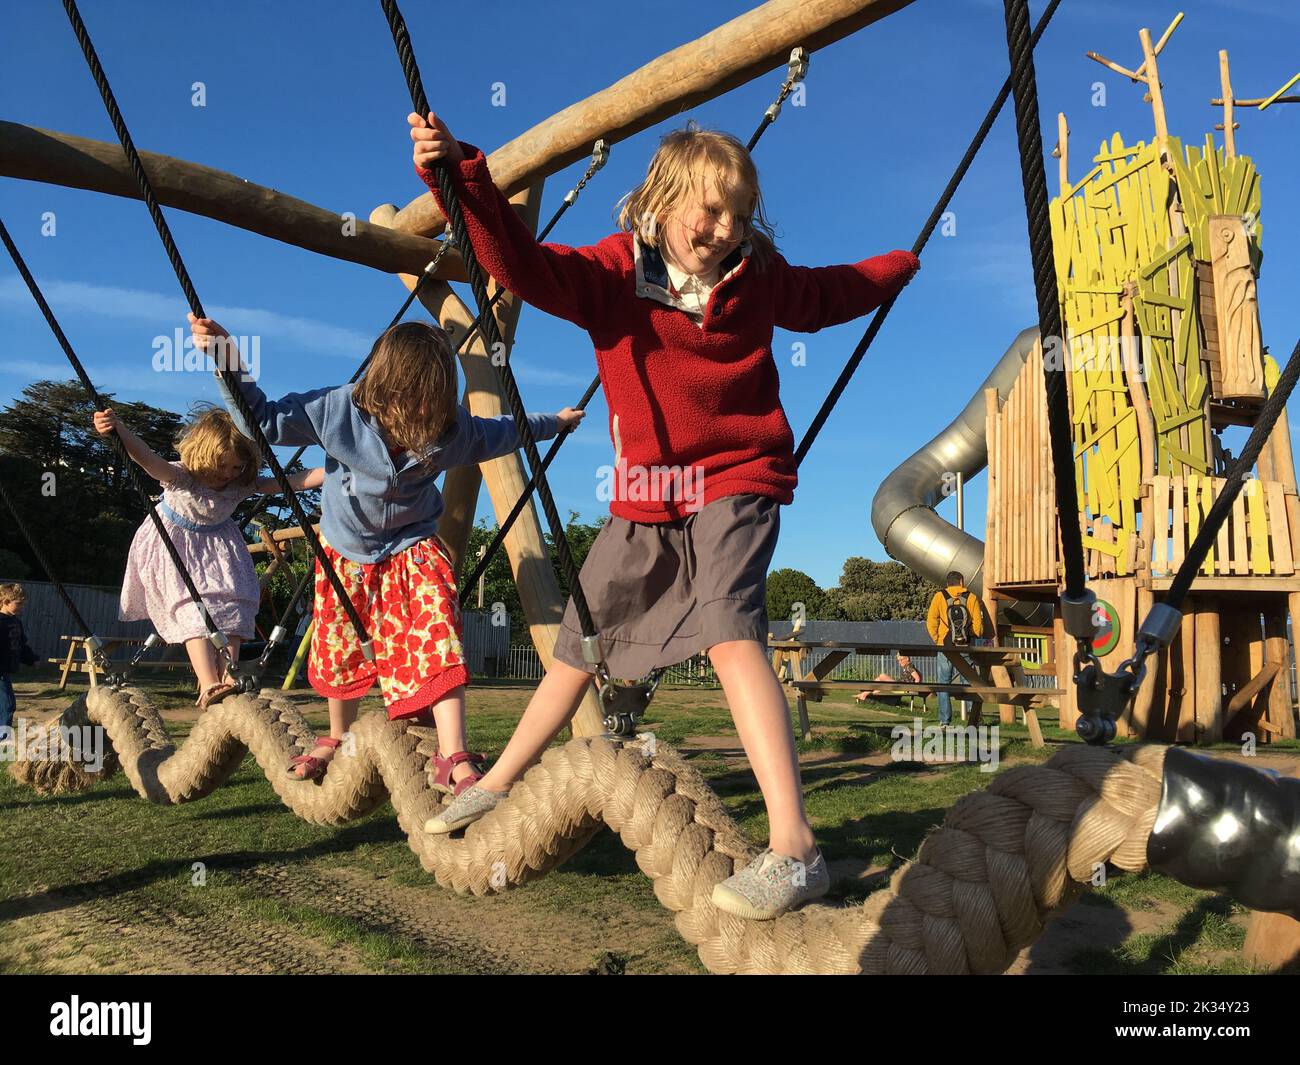 Three young girls / children / child / kids / kid play in the playground on the day with sun and blue sky. The play equipment involves a very thick climbing rope suspended horizontally, from a frame. The 3 girls ARE model released. (132) Stock Photo